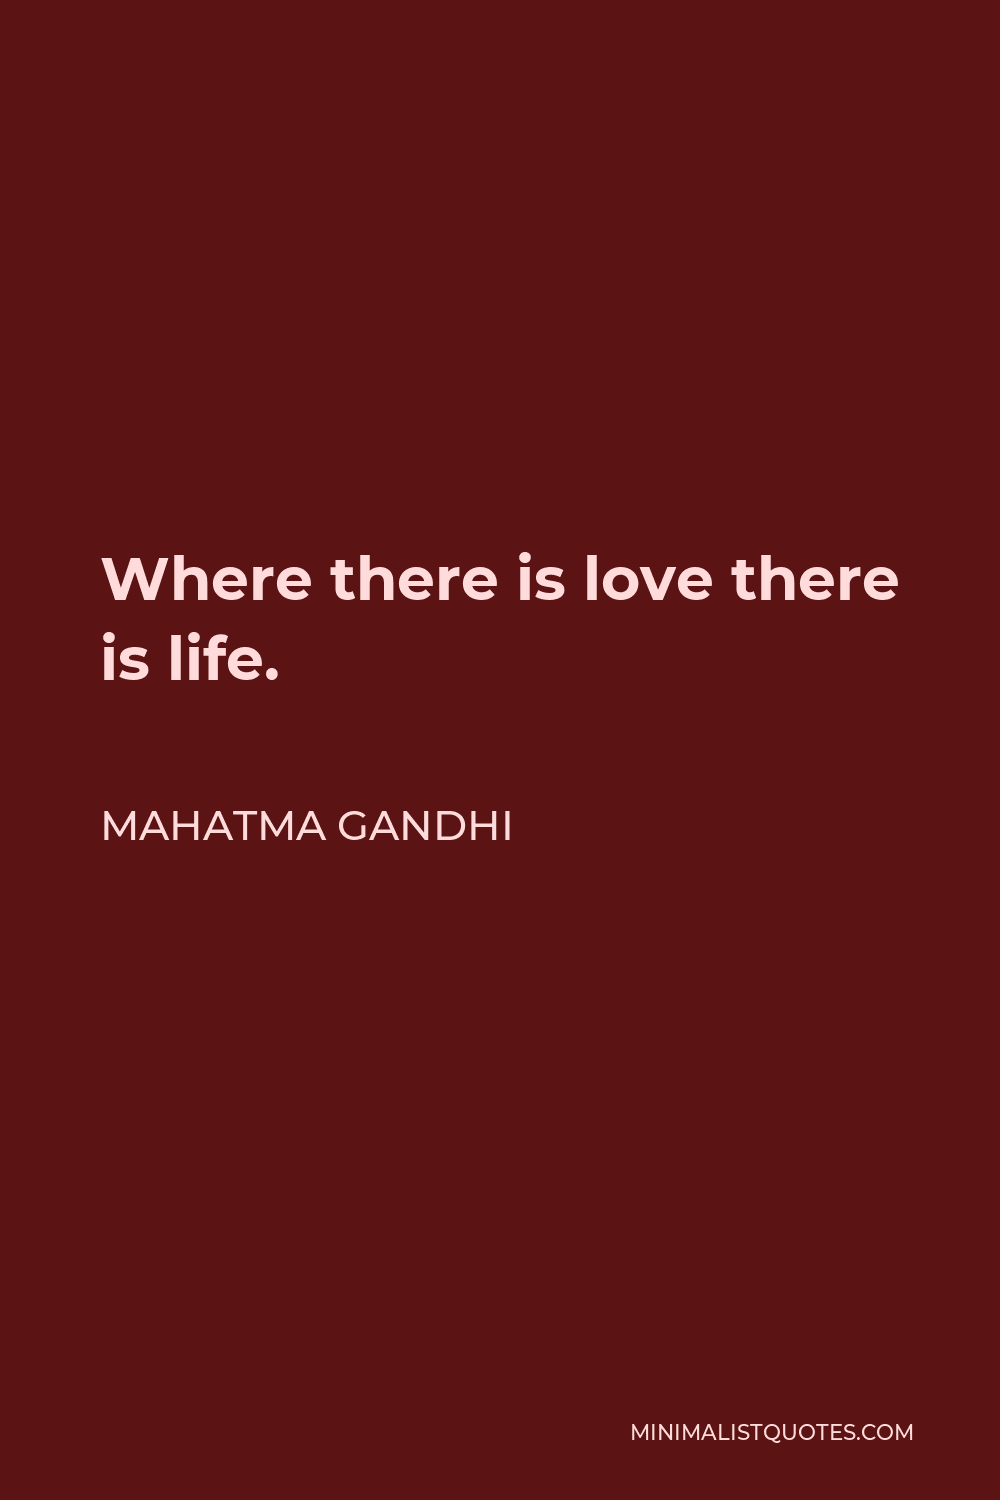 Mahatma Gandhi Quote - Where there is love there is life.